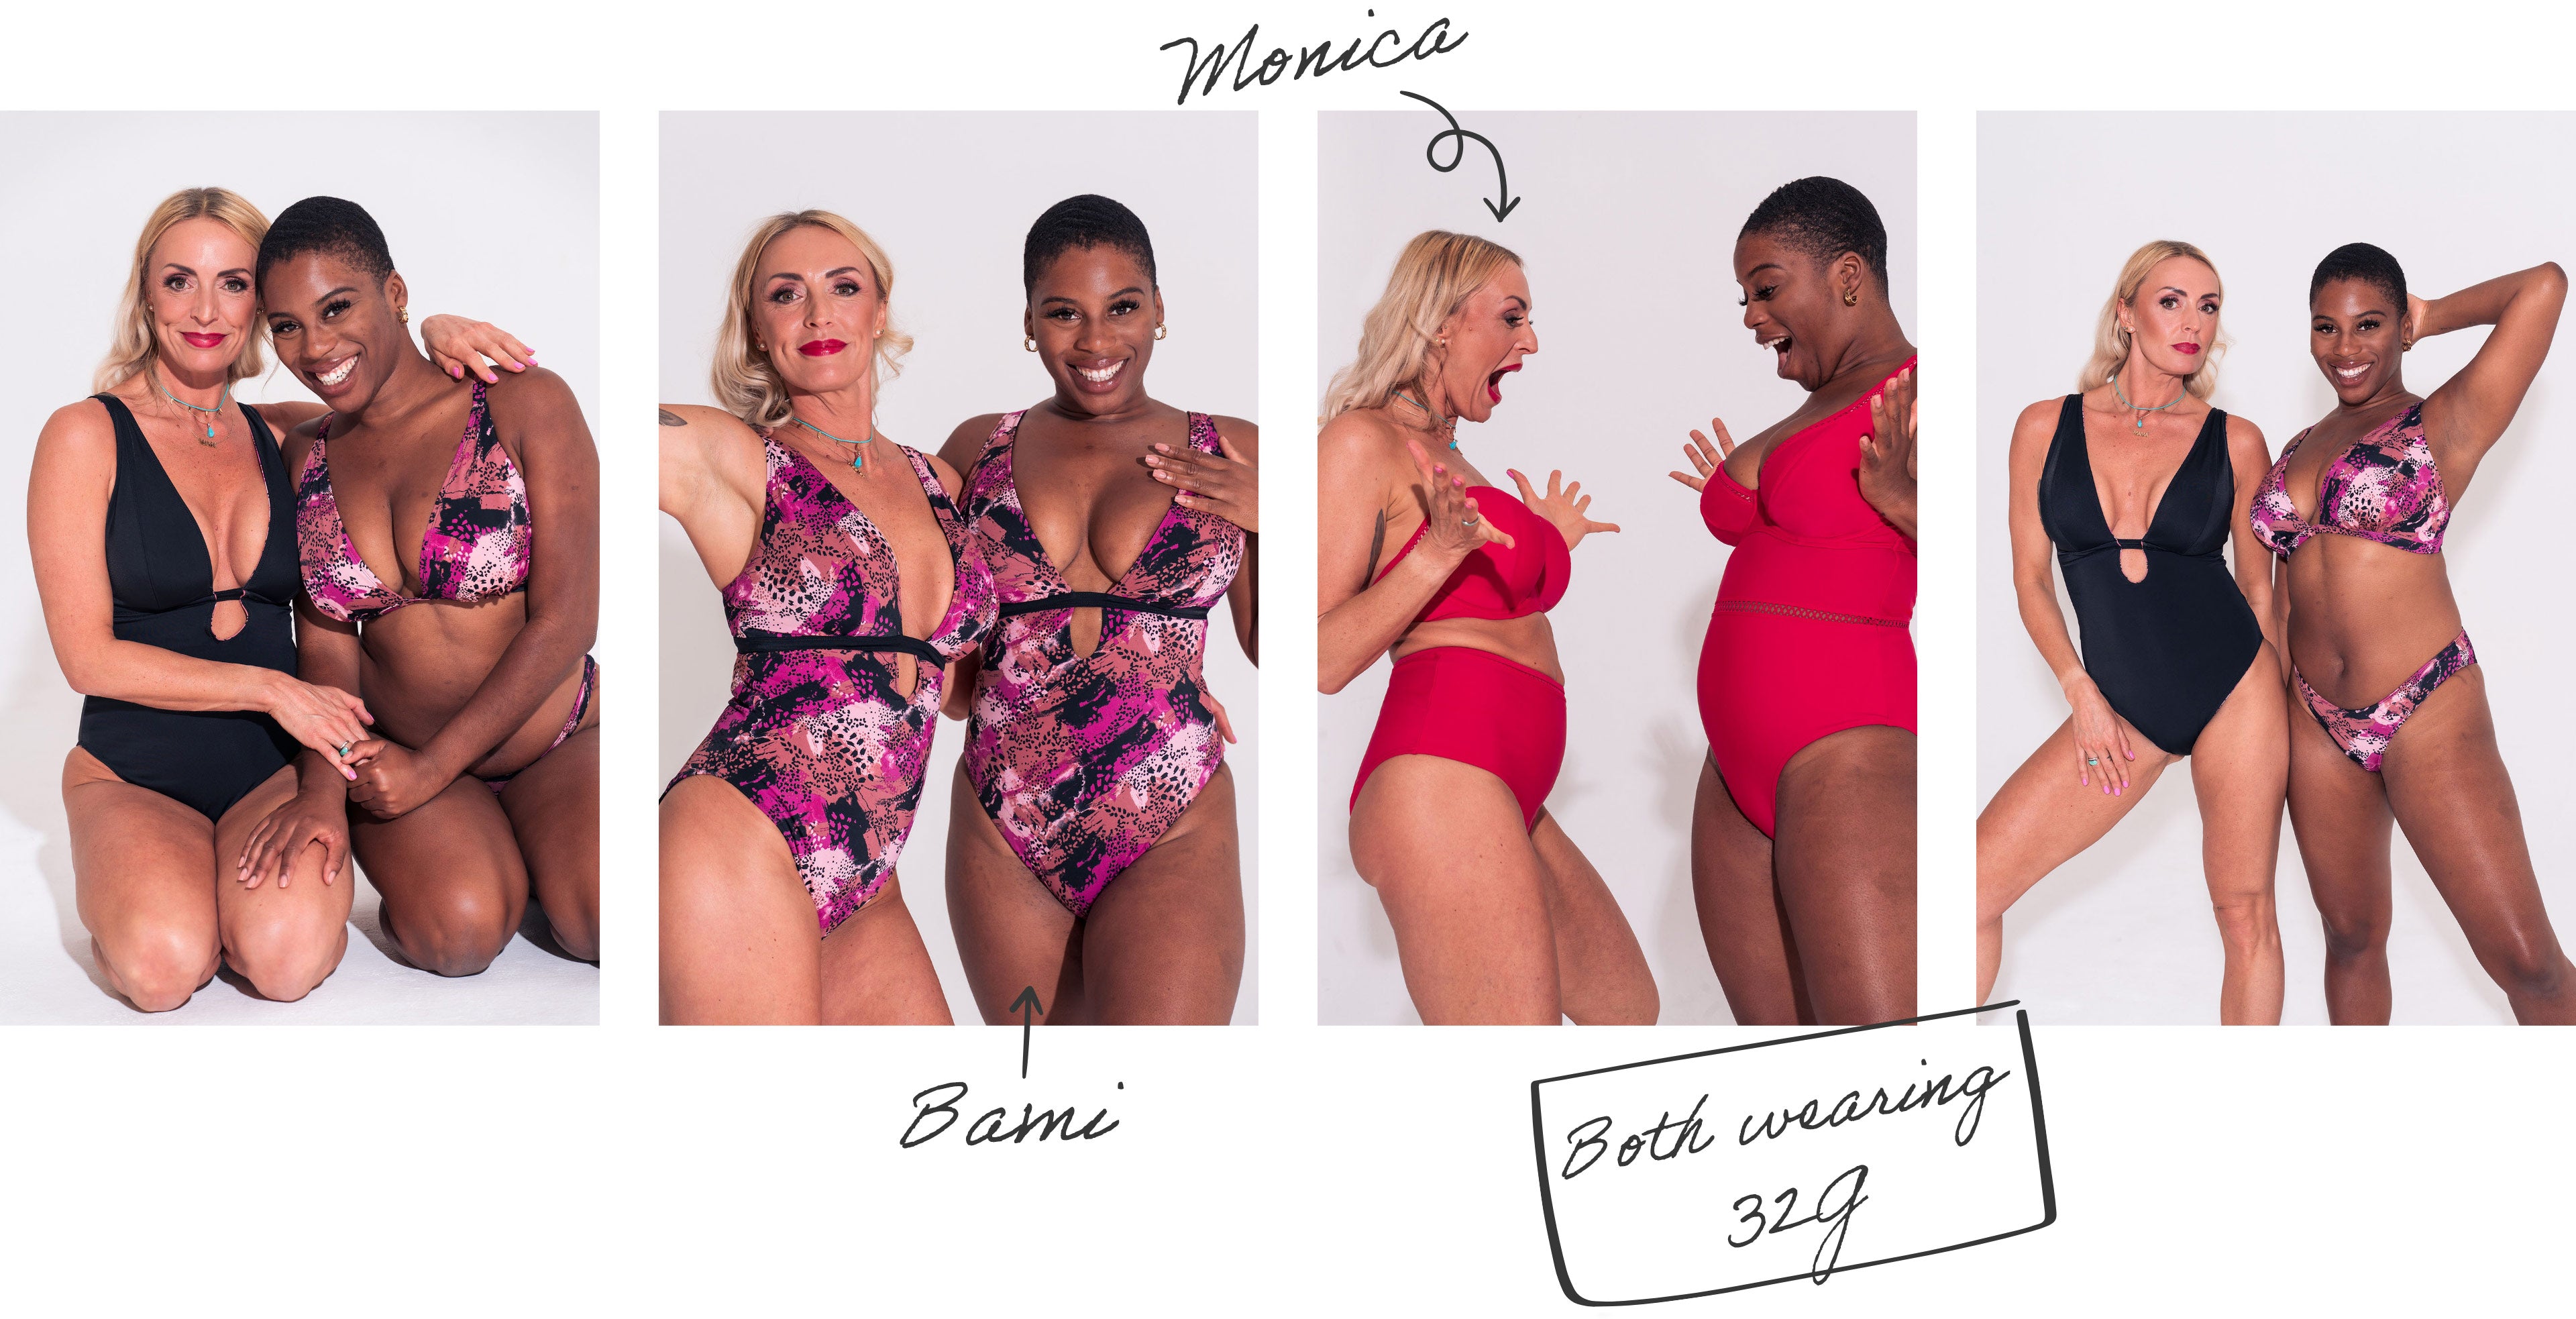 Monica and Bami both wear a 32g!